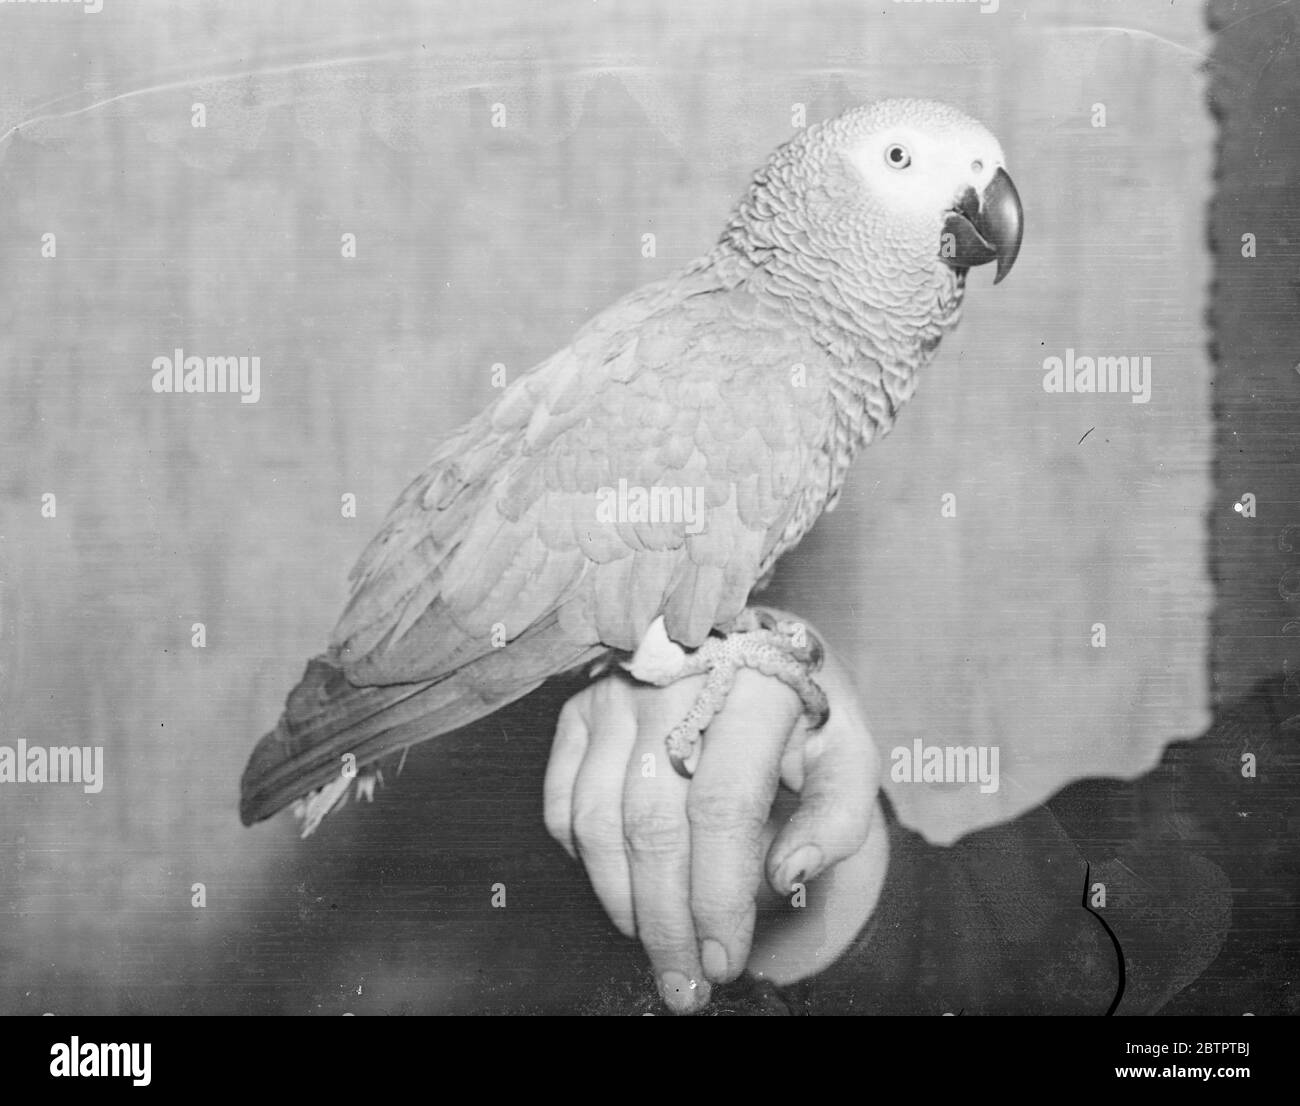 Rare bird!. African parrot for London, show. Nora, a rare African Grey Parrot from West Africa, will be exhibited by Mr P Abrahams of Upper Norwood, London, at the 'Crystal Palace' National Cage Birds Show opening at the Dorland Hall, Regent Street, on Thursday. Photo shows, Nora, the African Grey parrot. 18 January 1938 Stock Photo